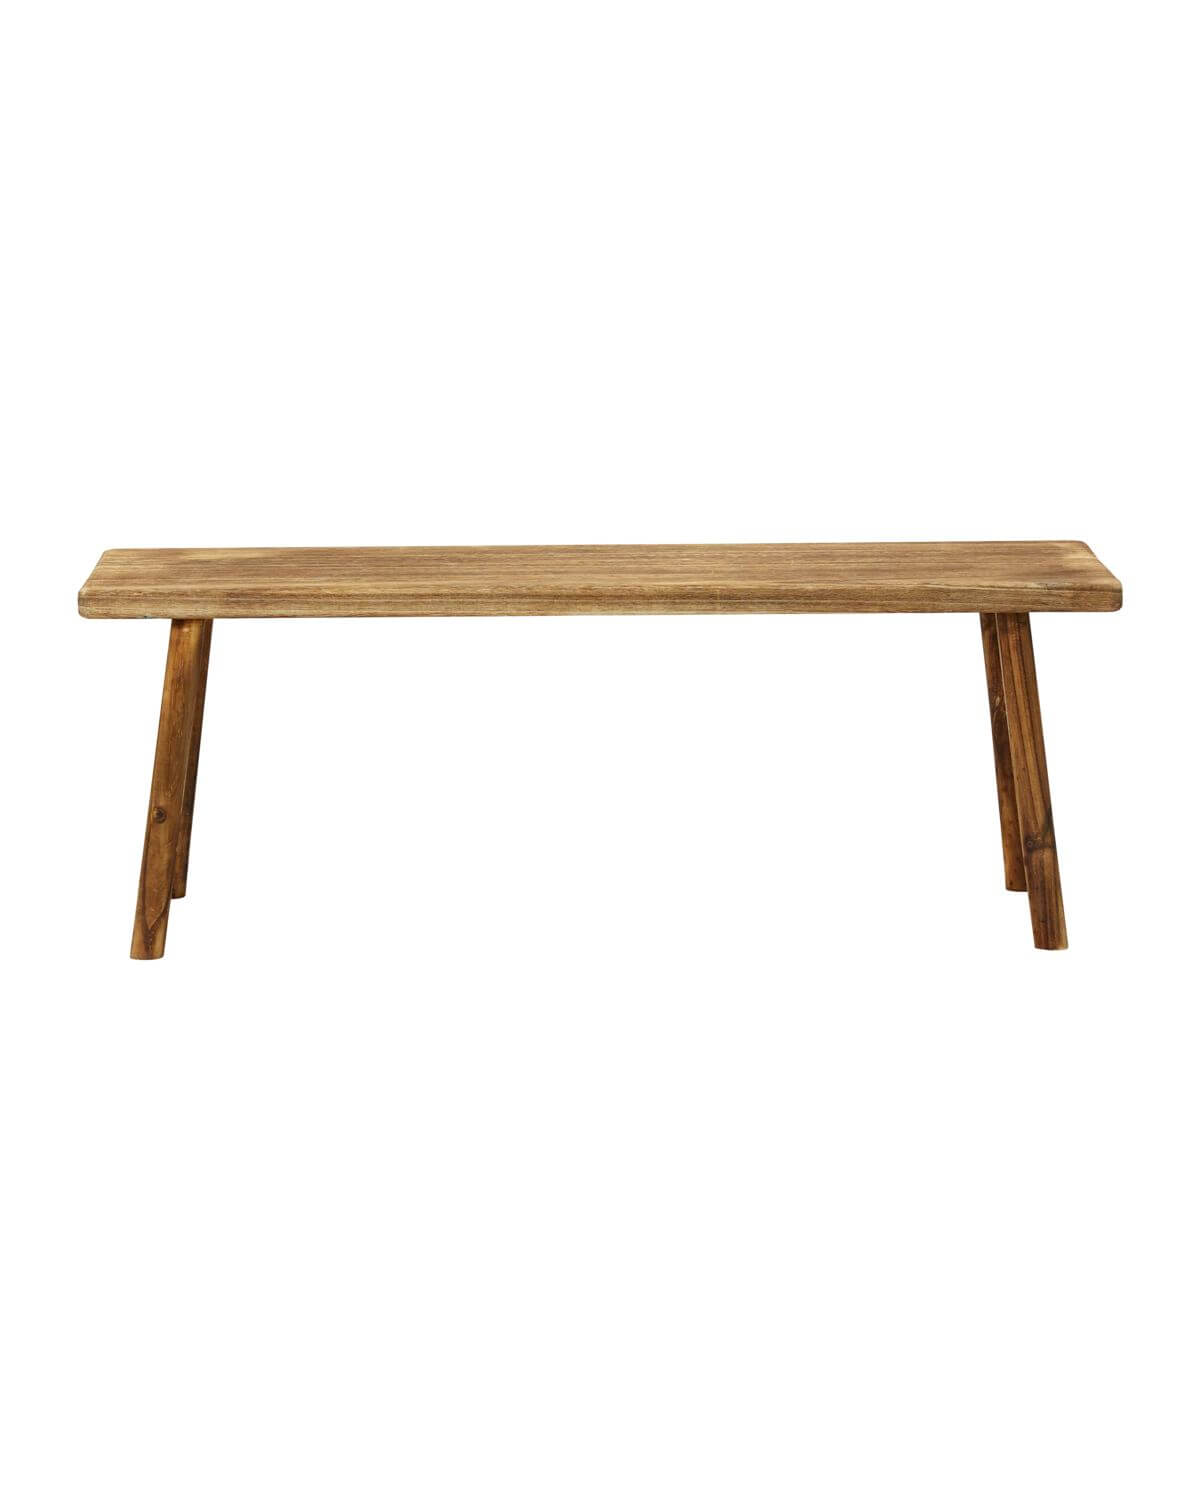 Nadi Bench | 120cm | Natural Wood | by House Doctor - Lifestory